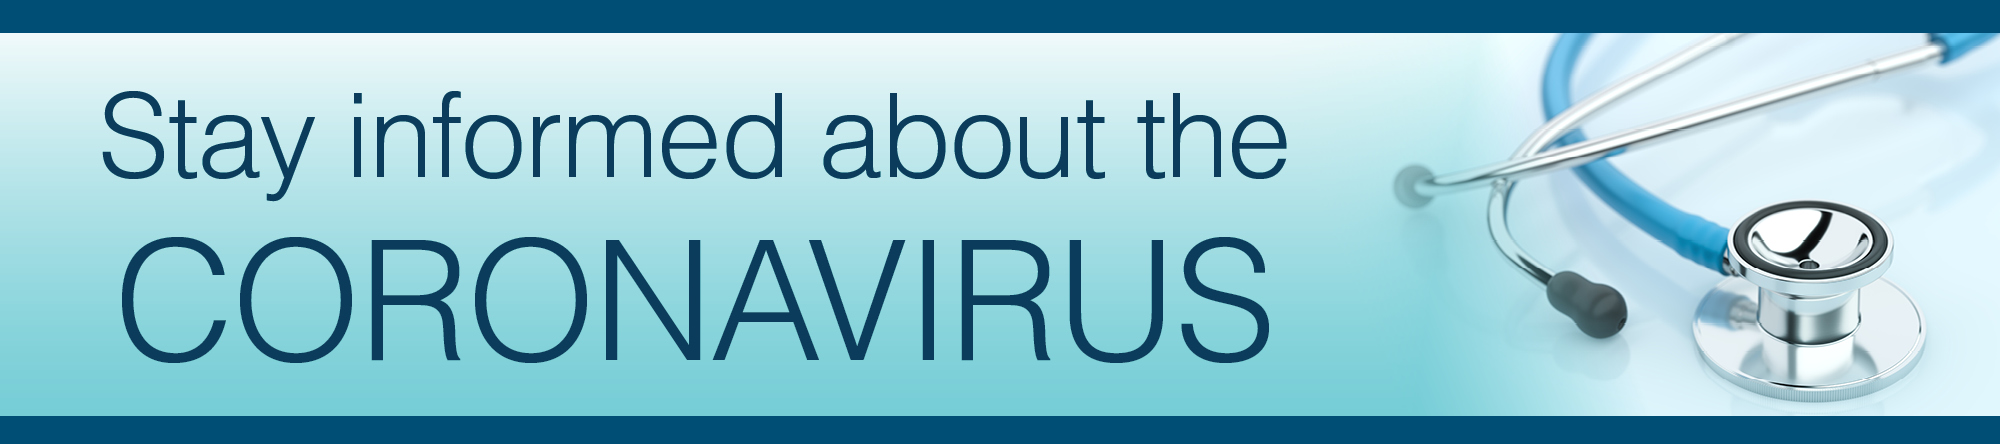 Stay informed about the coronavirus